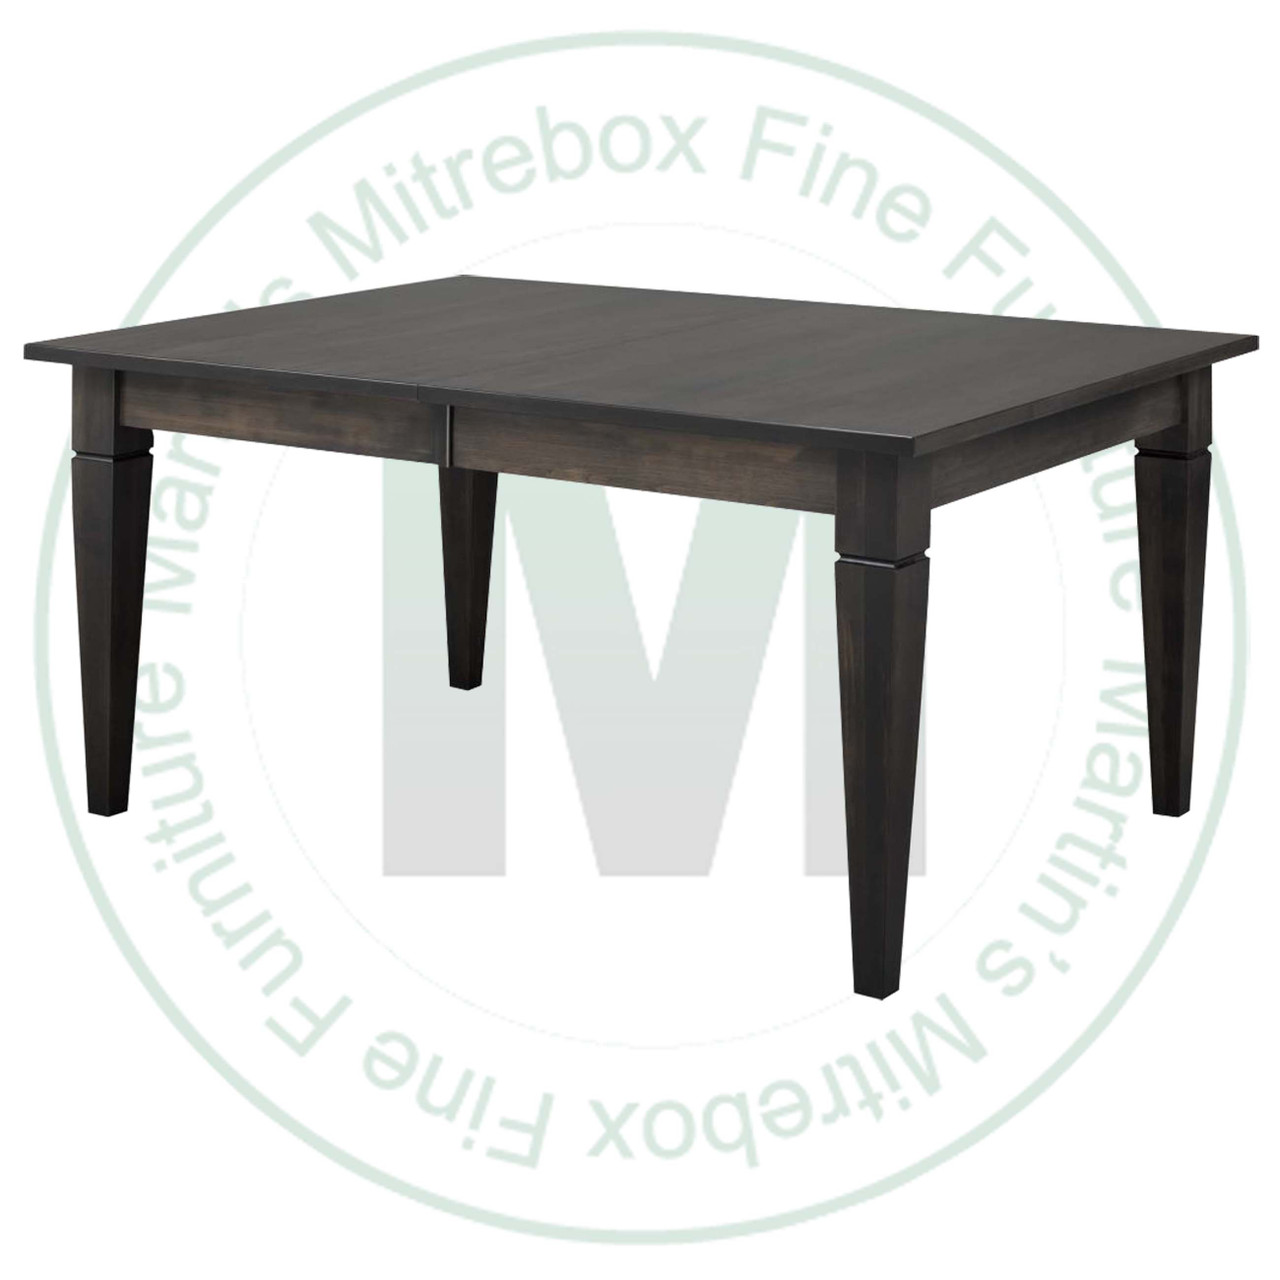 Wormy Maple Reesor Extension Harvest Table 36''D x 48''W x 30''H With 2 - 12'' Leaves Table Has 1'' Thick Top